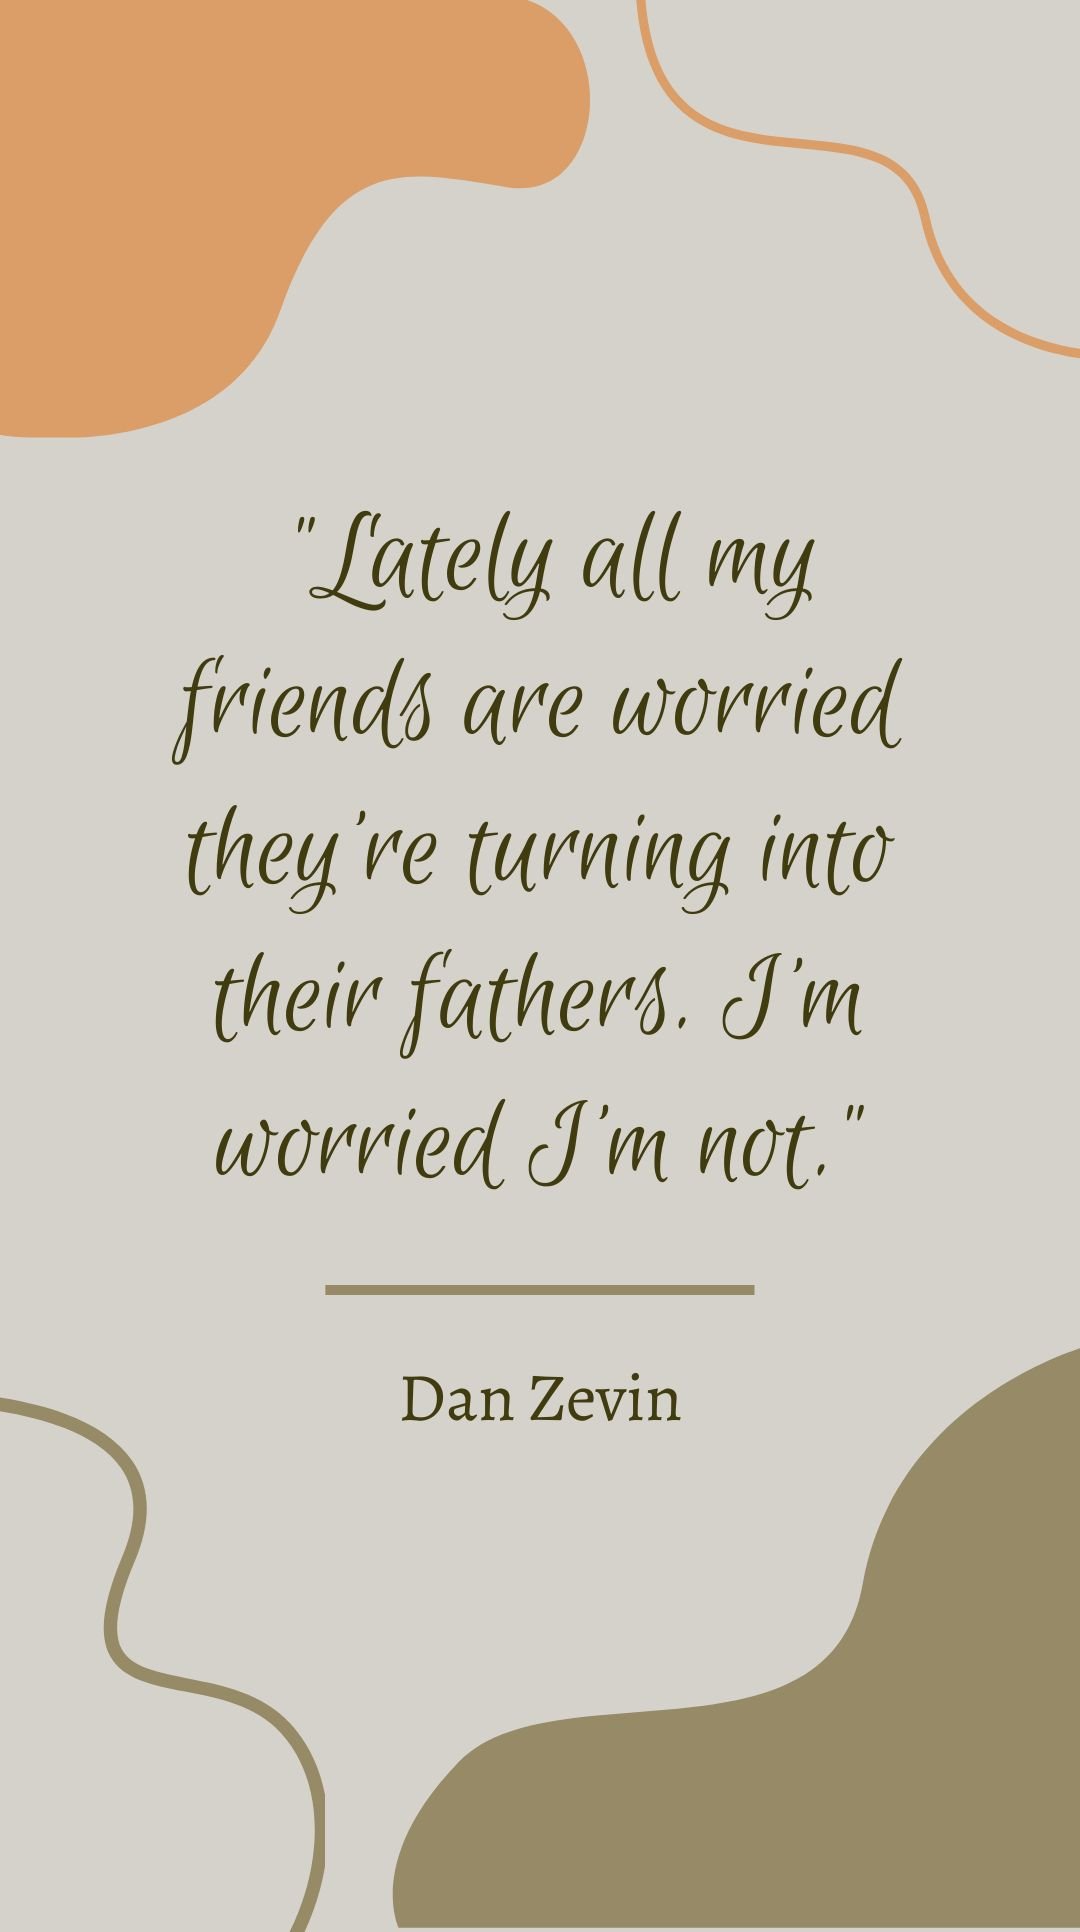 Free  Dan Zevin - Lately all my friends are worried they’re turning into their fathers. I’m worried I’m not. in JPG